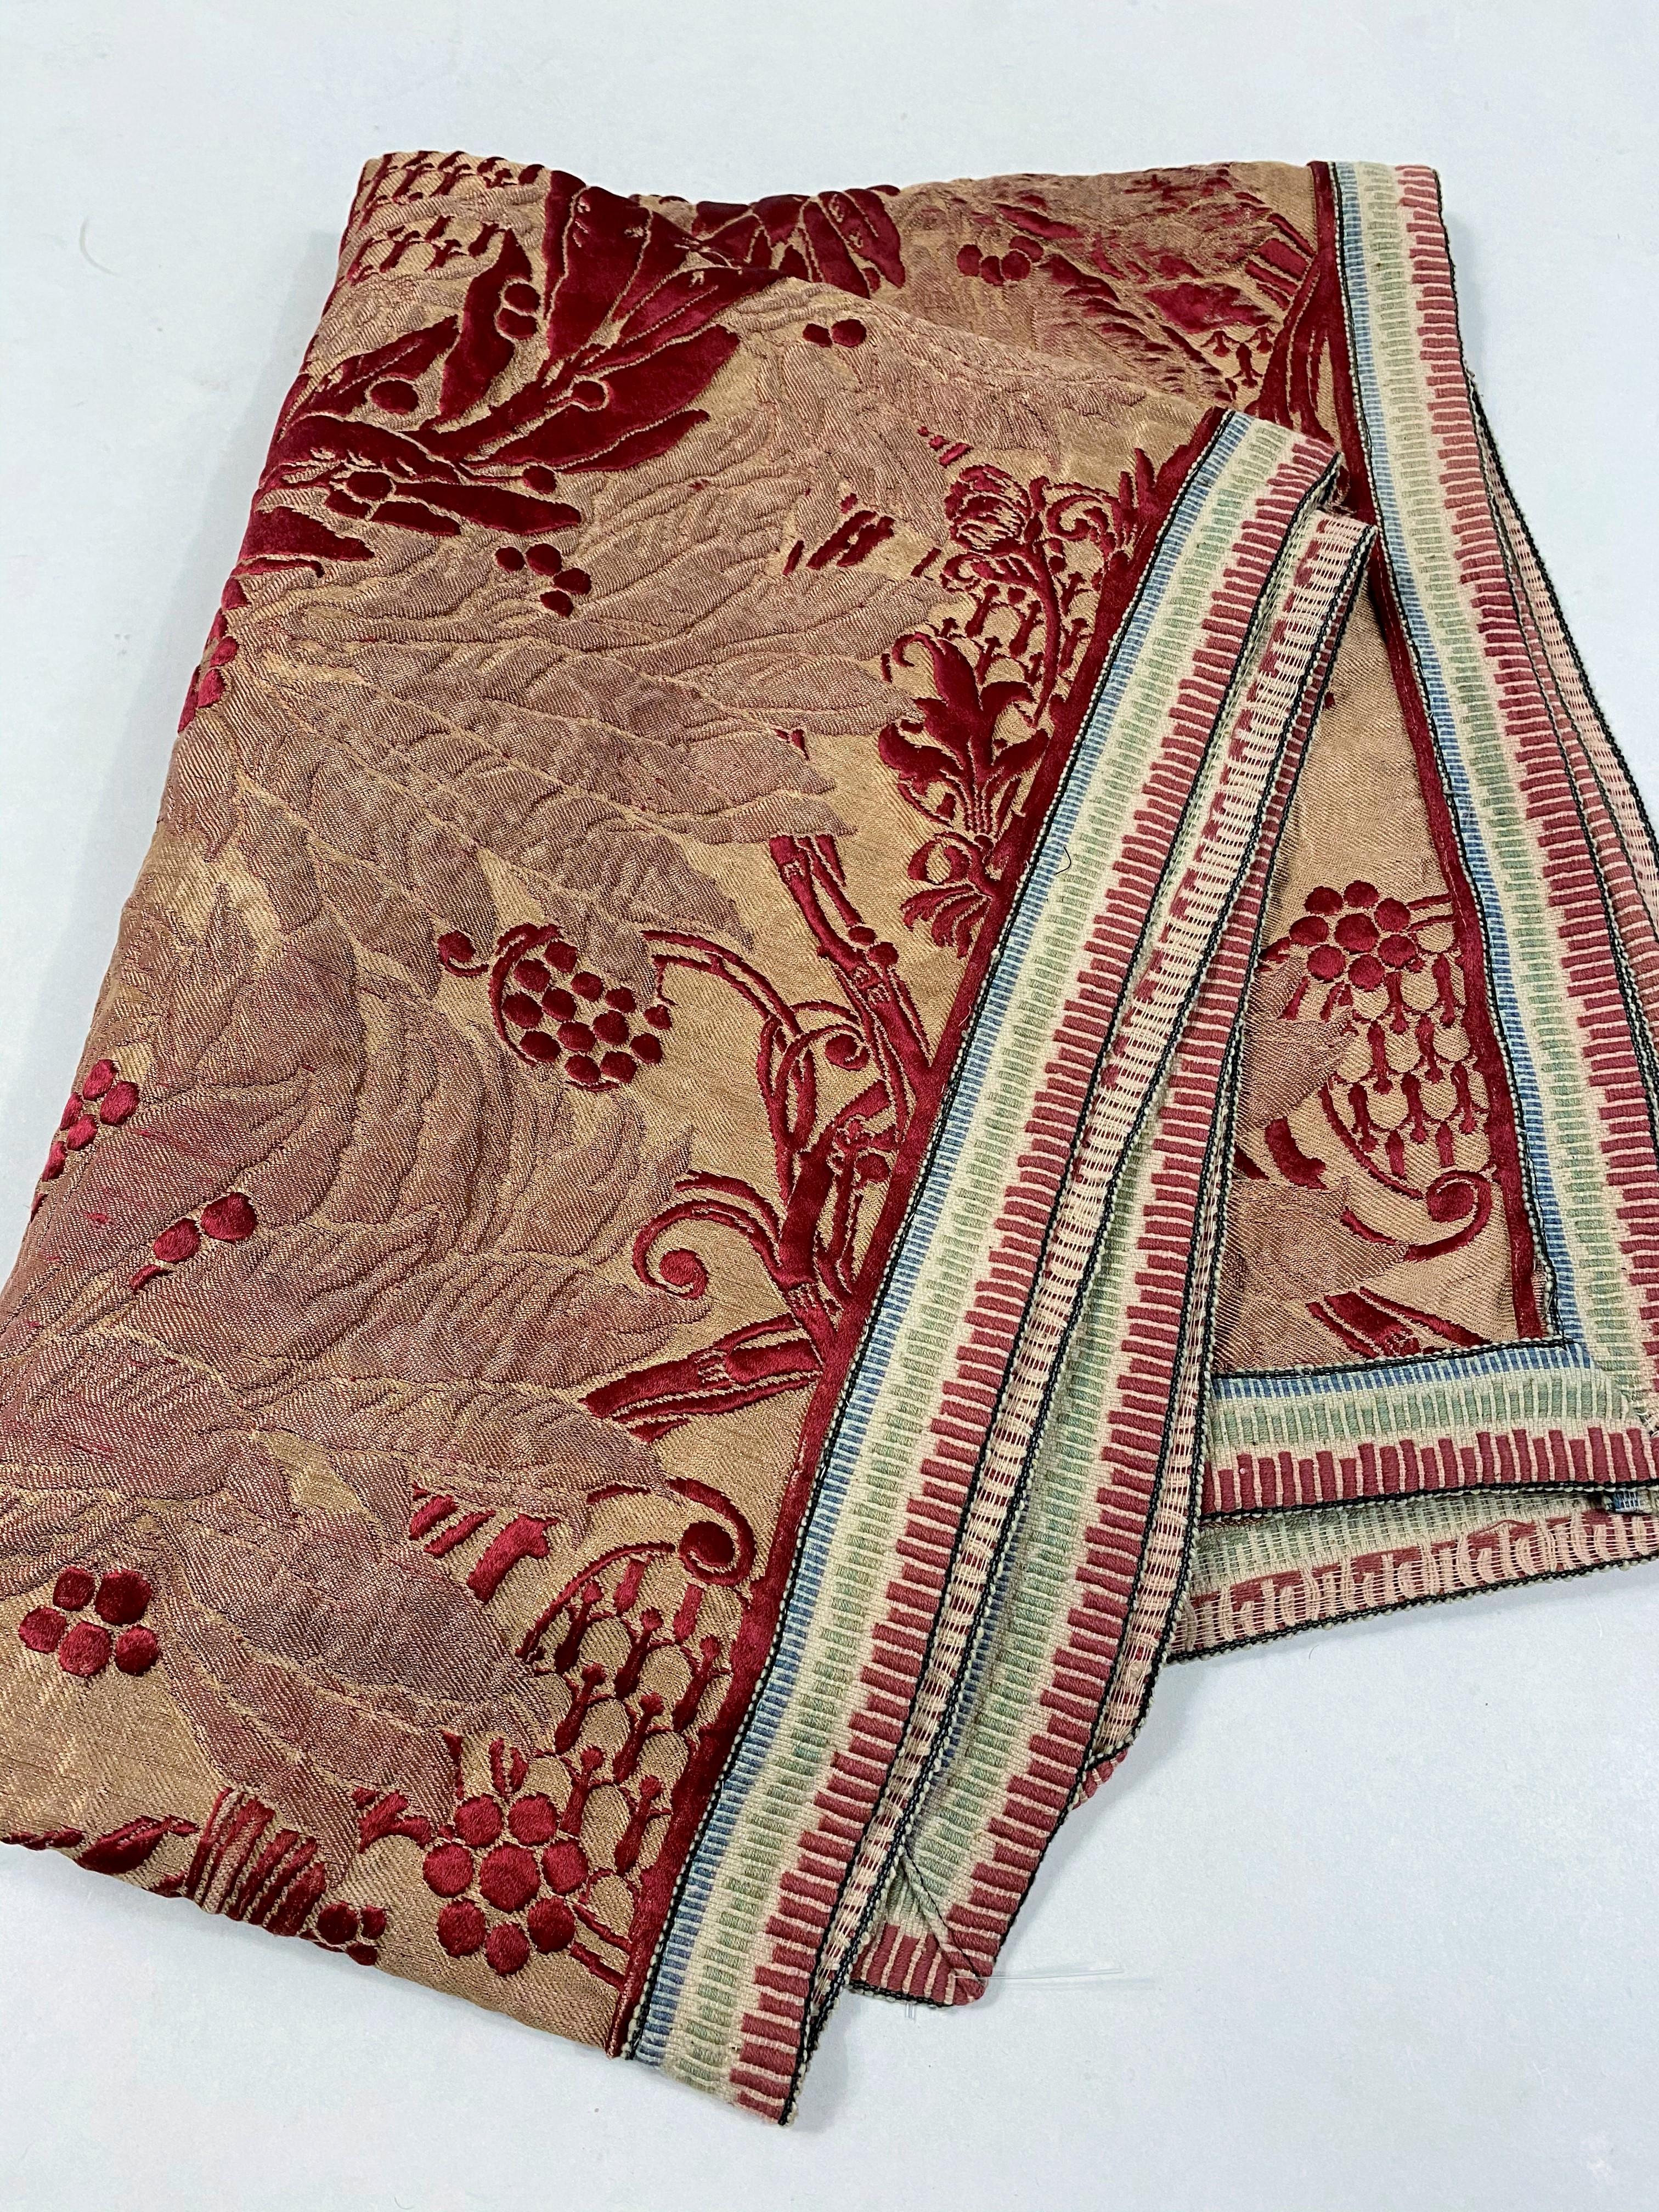 A French Art Nouveau Brocaded Silk by Adrien Karbowsky - Tassinari & Chatel 1899 For Sale 10